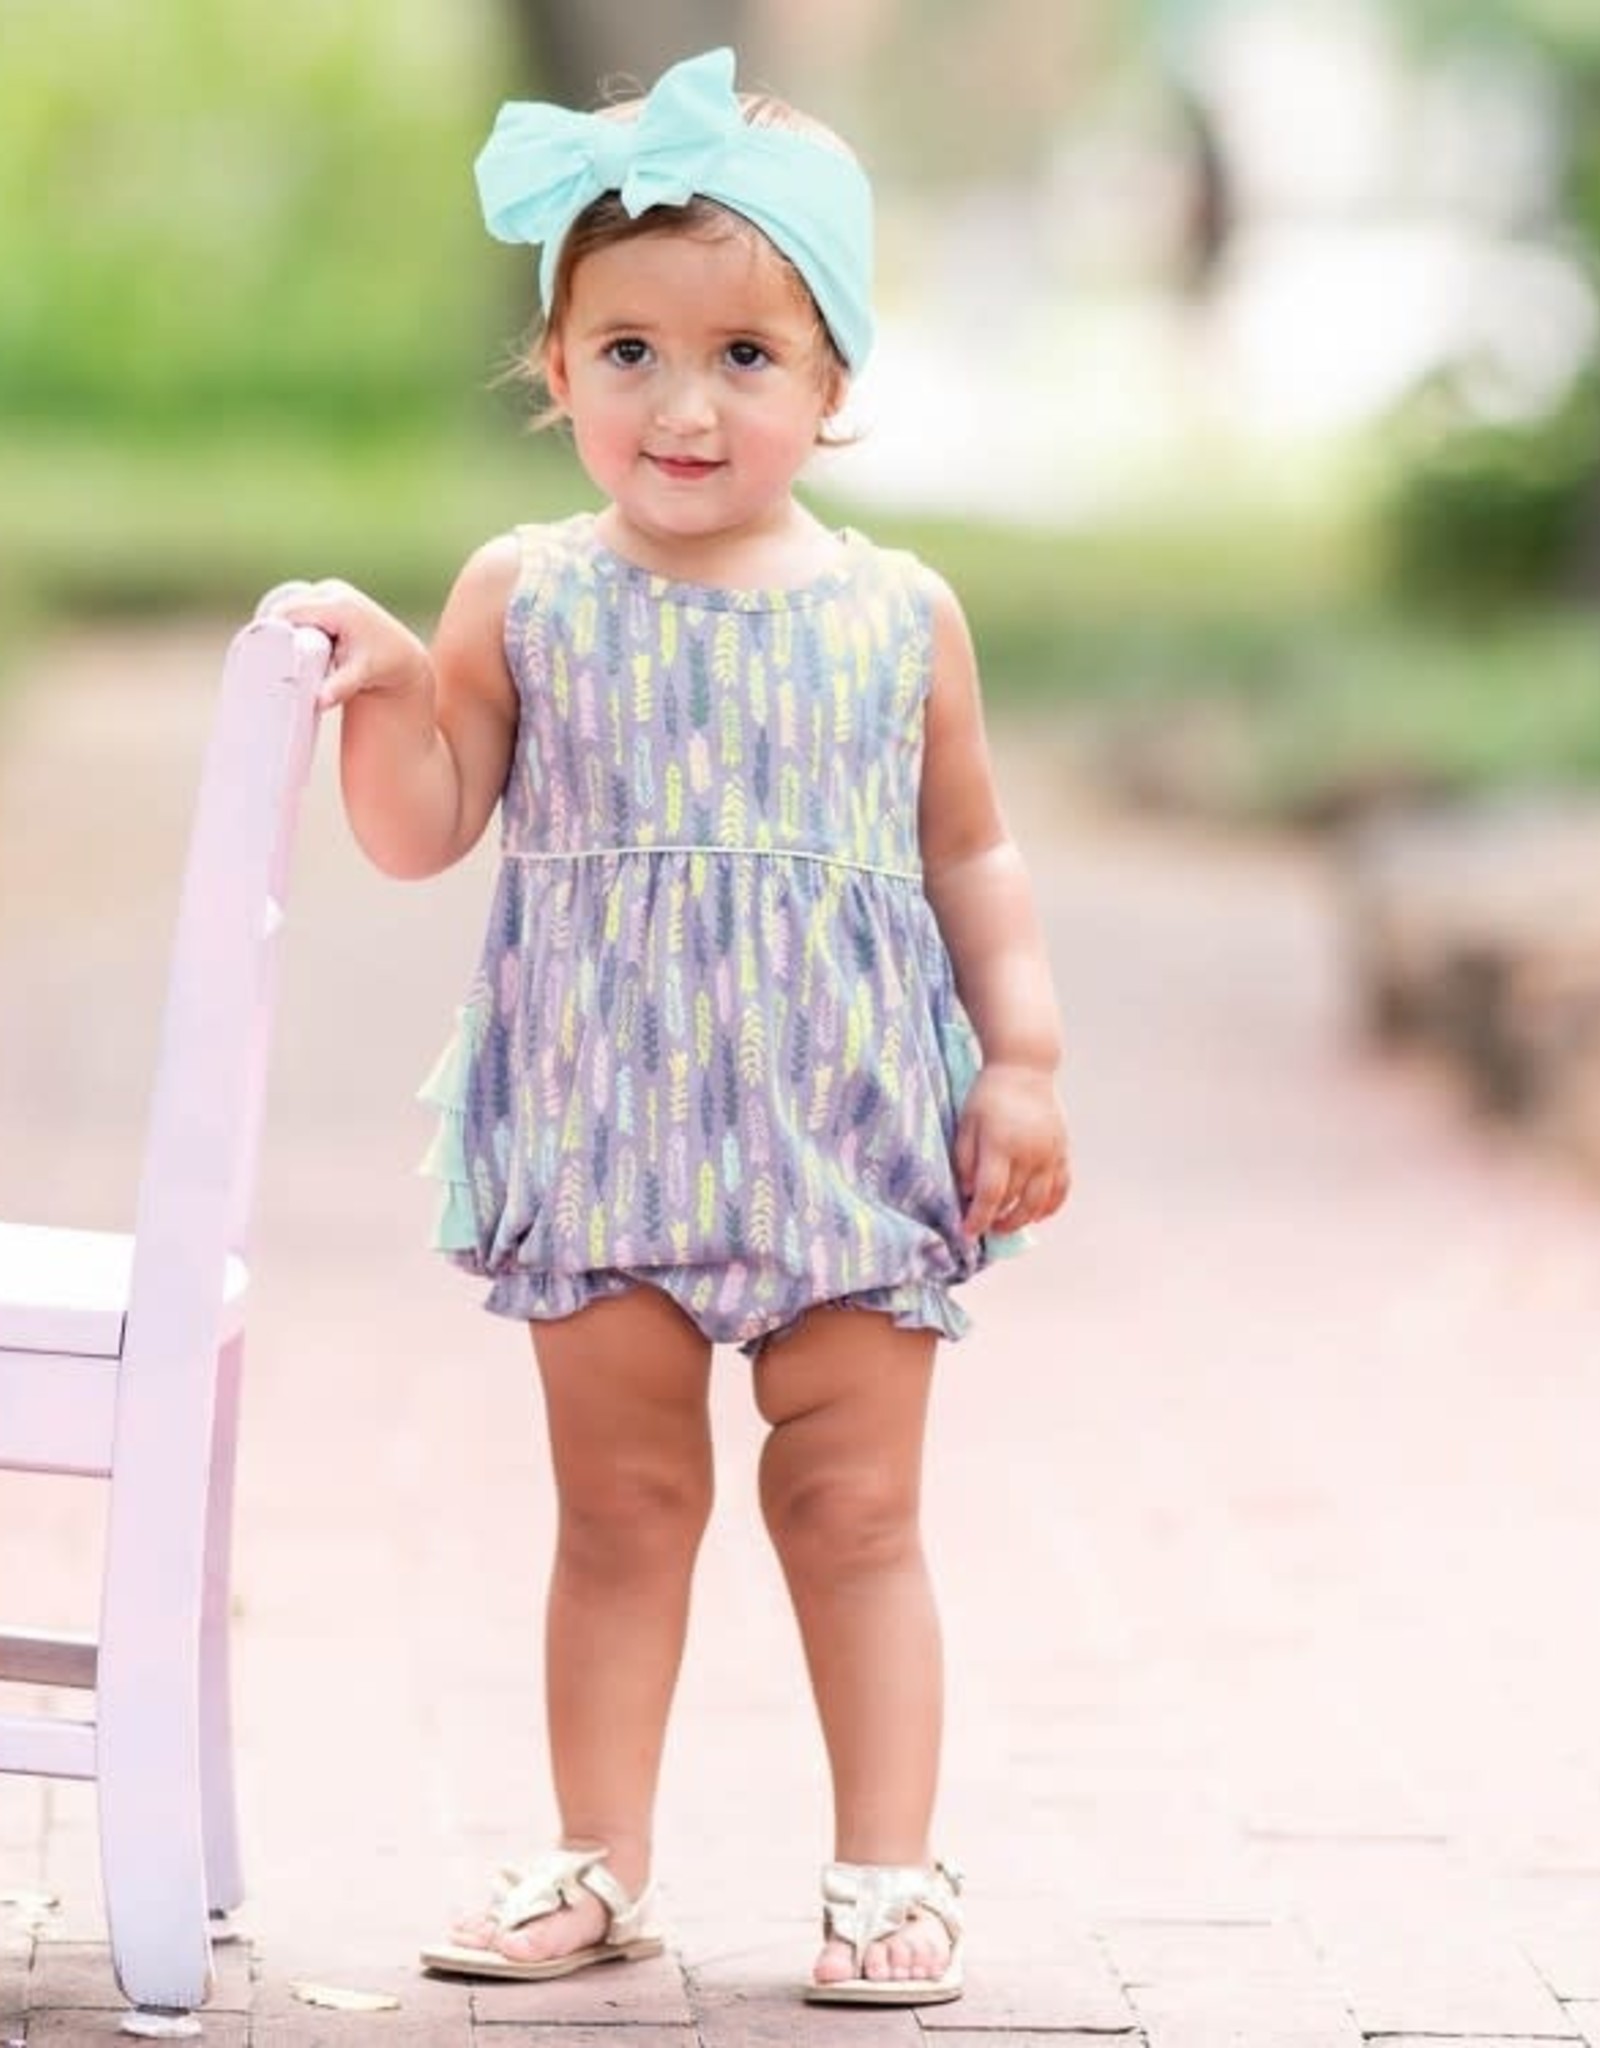 RuffleButts Feather Folklore Bubble Romper